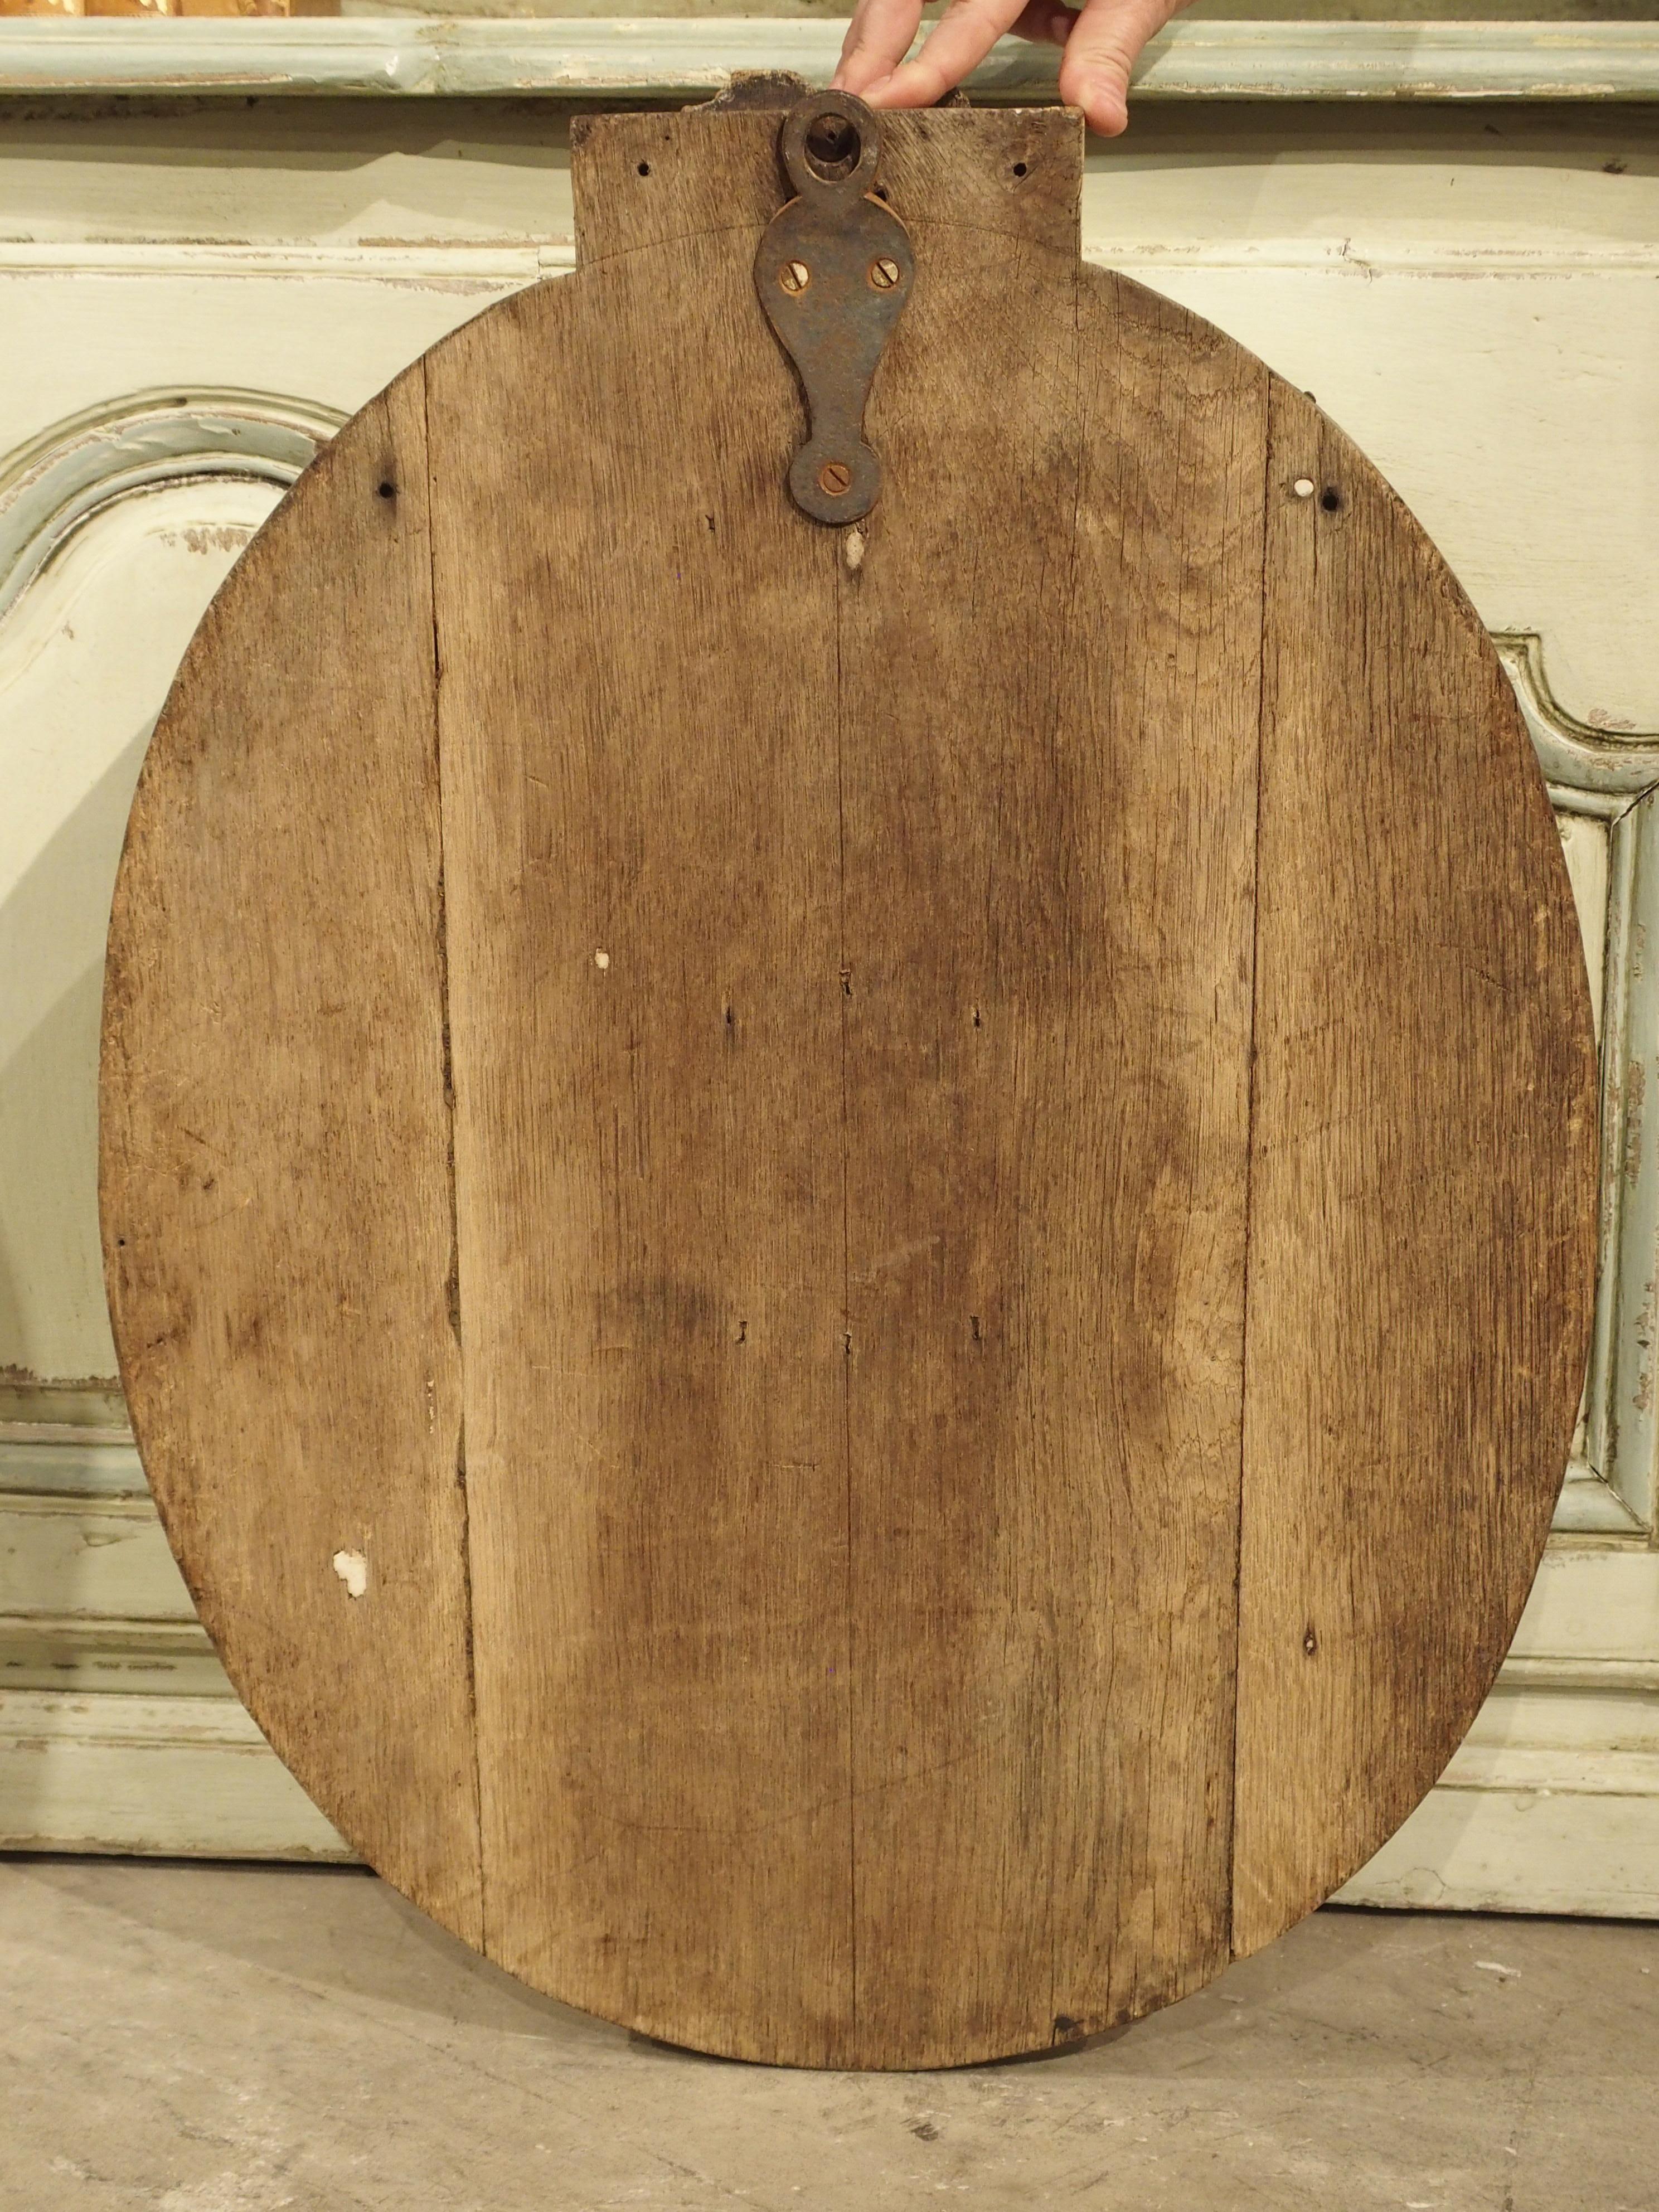 This incredibly detailed stripped oak oval medallion plaque depicting the profile of a monk comes from France, circa 1860.

Our monk is turned to his left, so that the right side of his face is visible. The expressionless monk has a tonsure